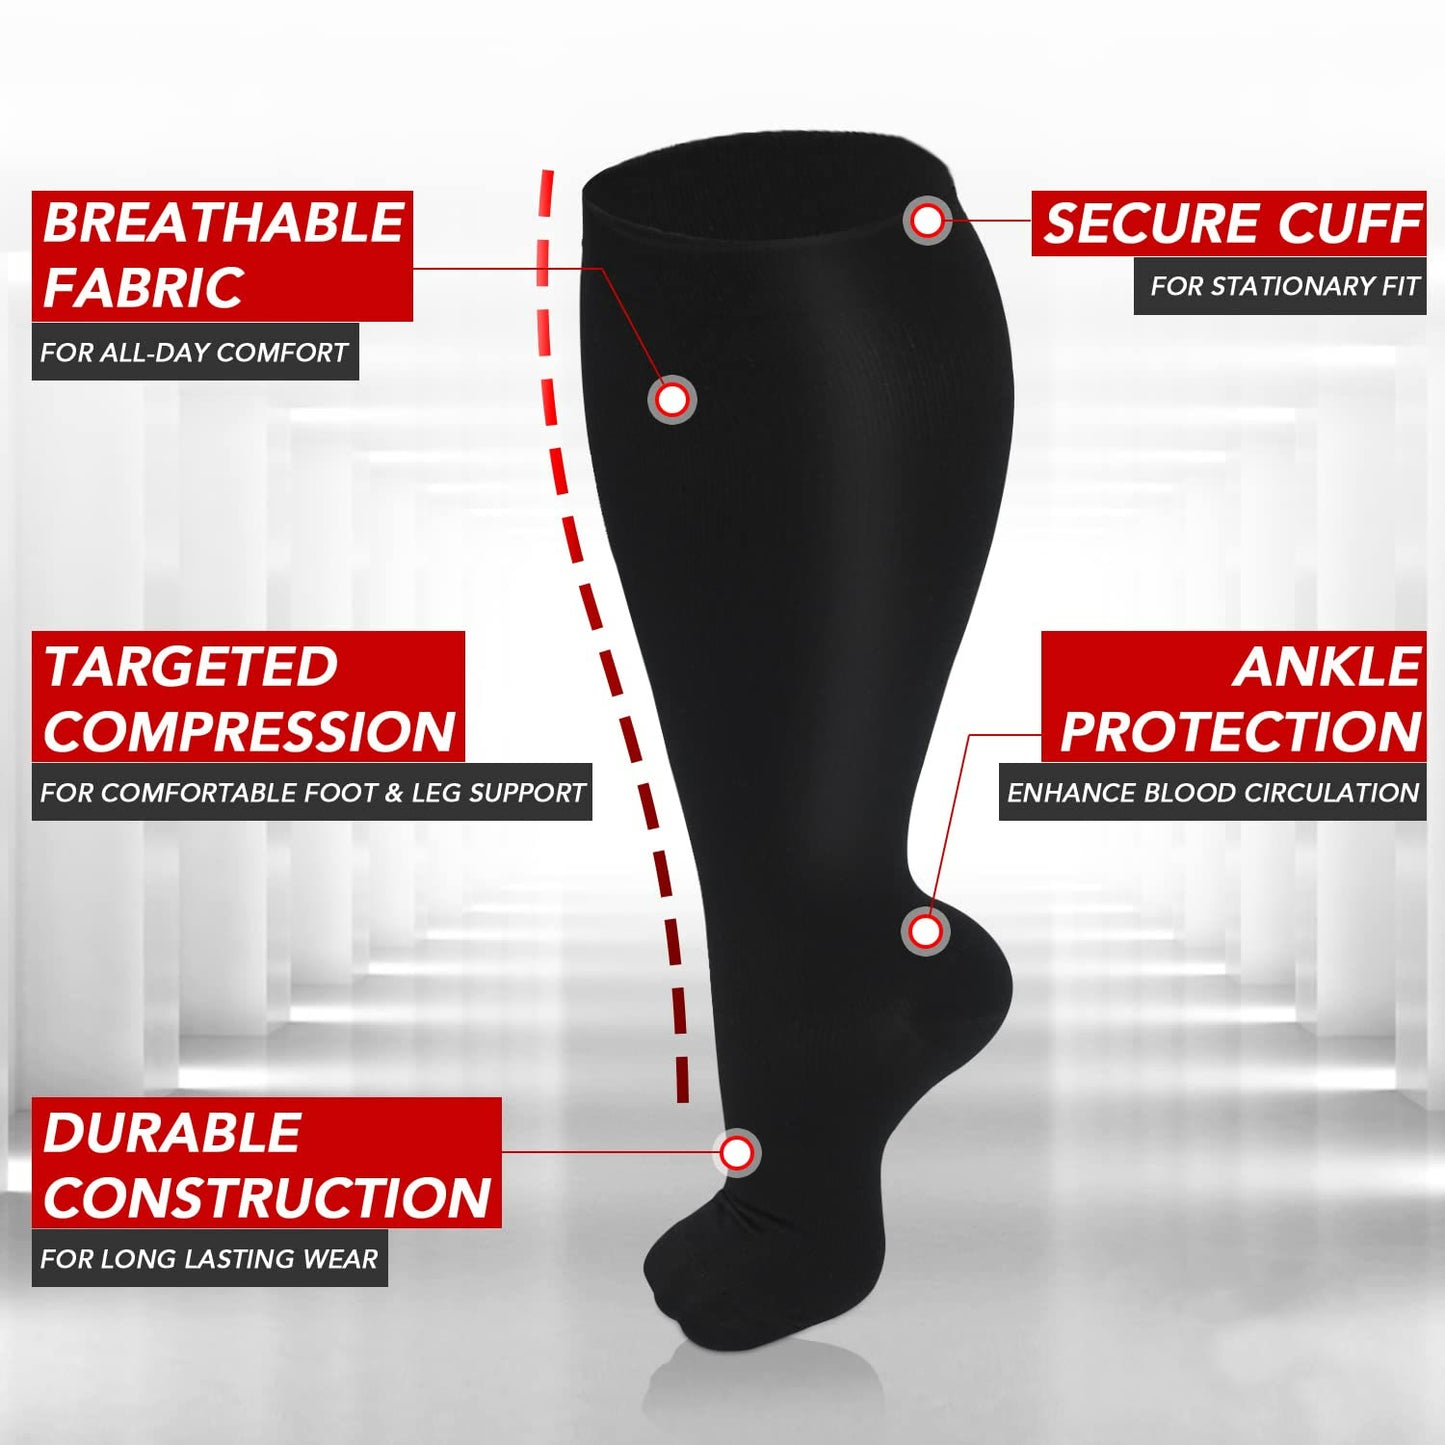 Blue Electrocardiogram Solid Plus Size Compression Socks(3 Pairs)